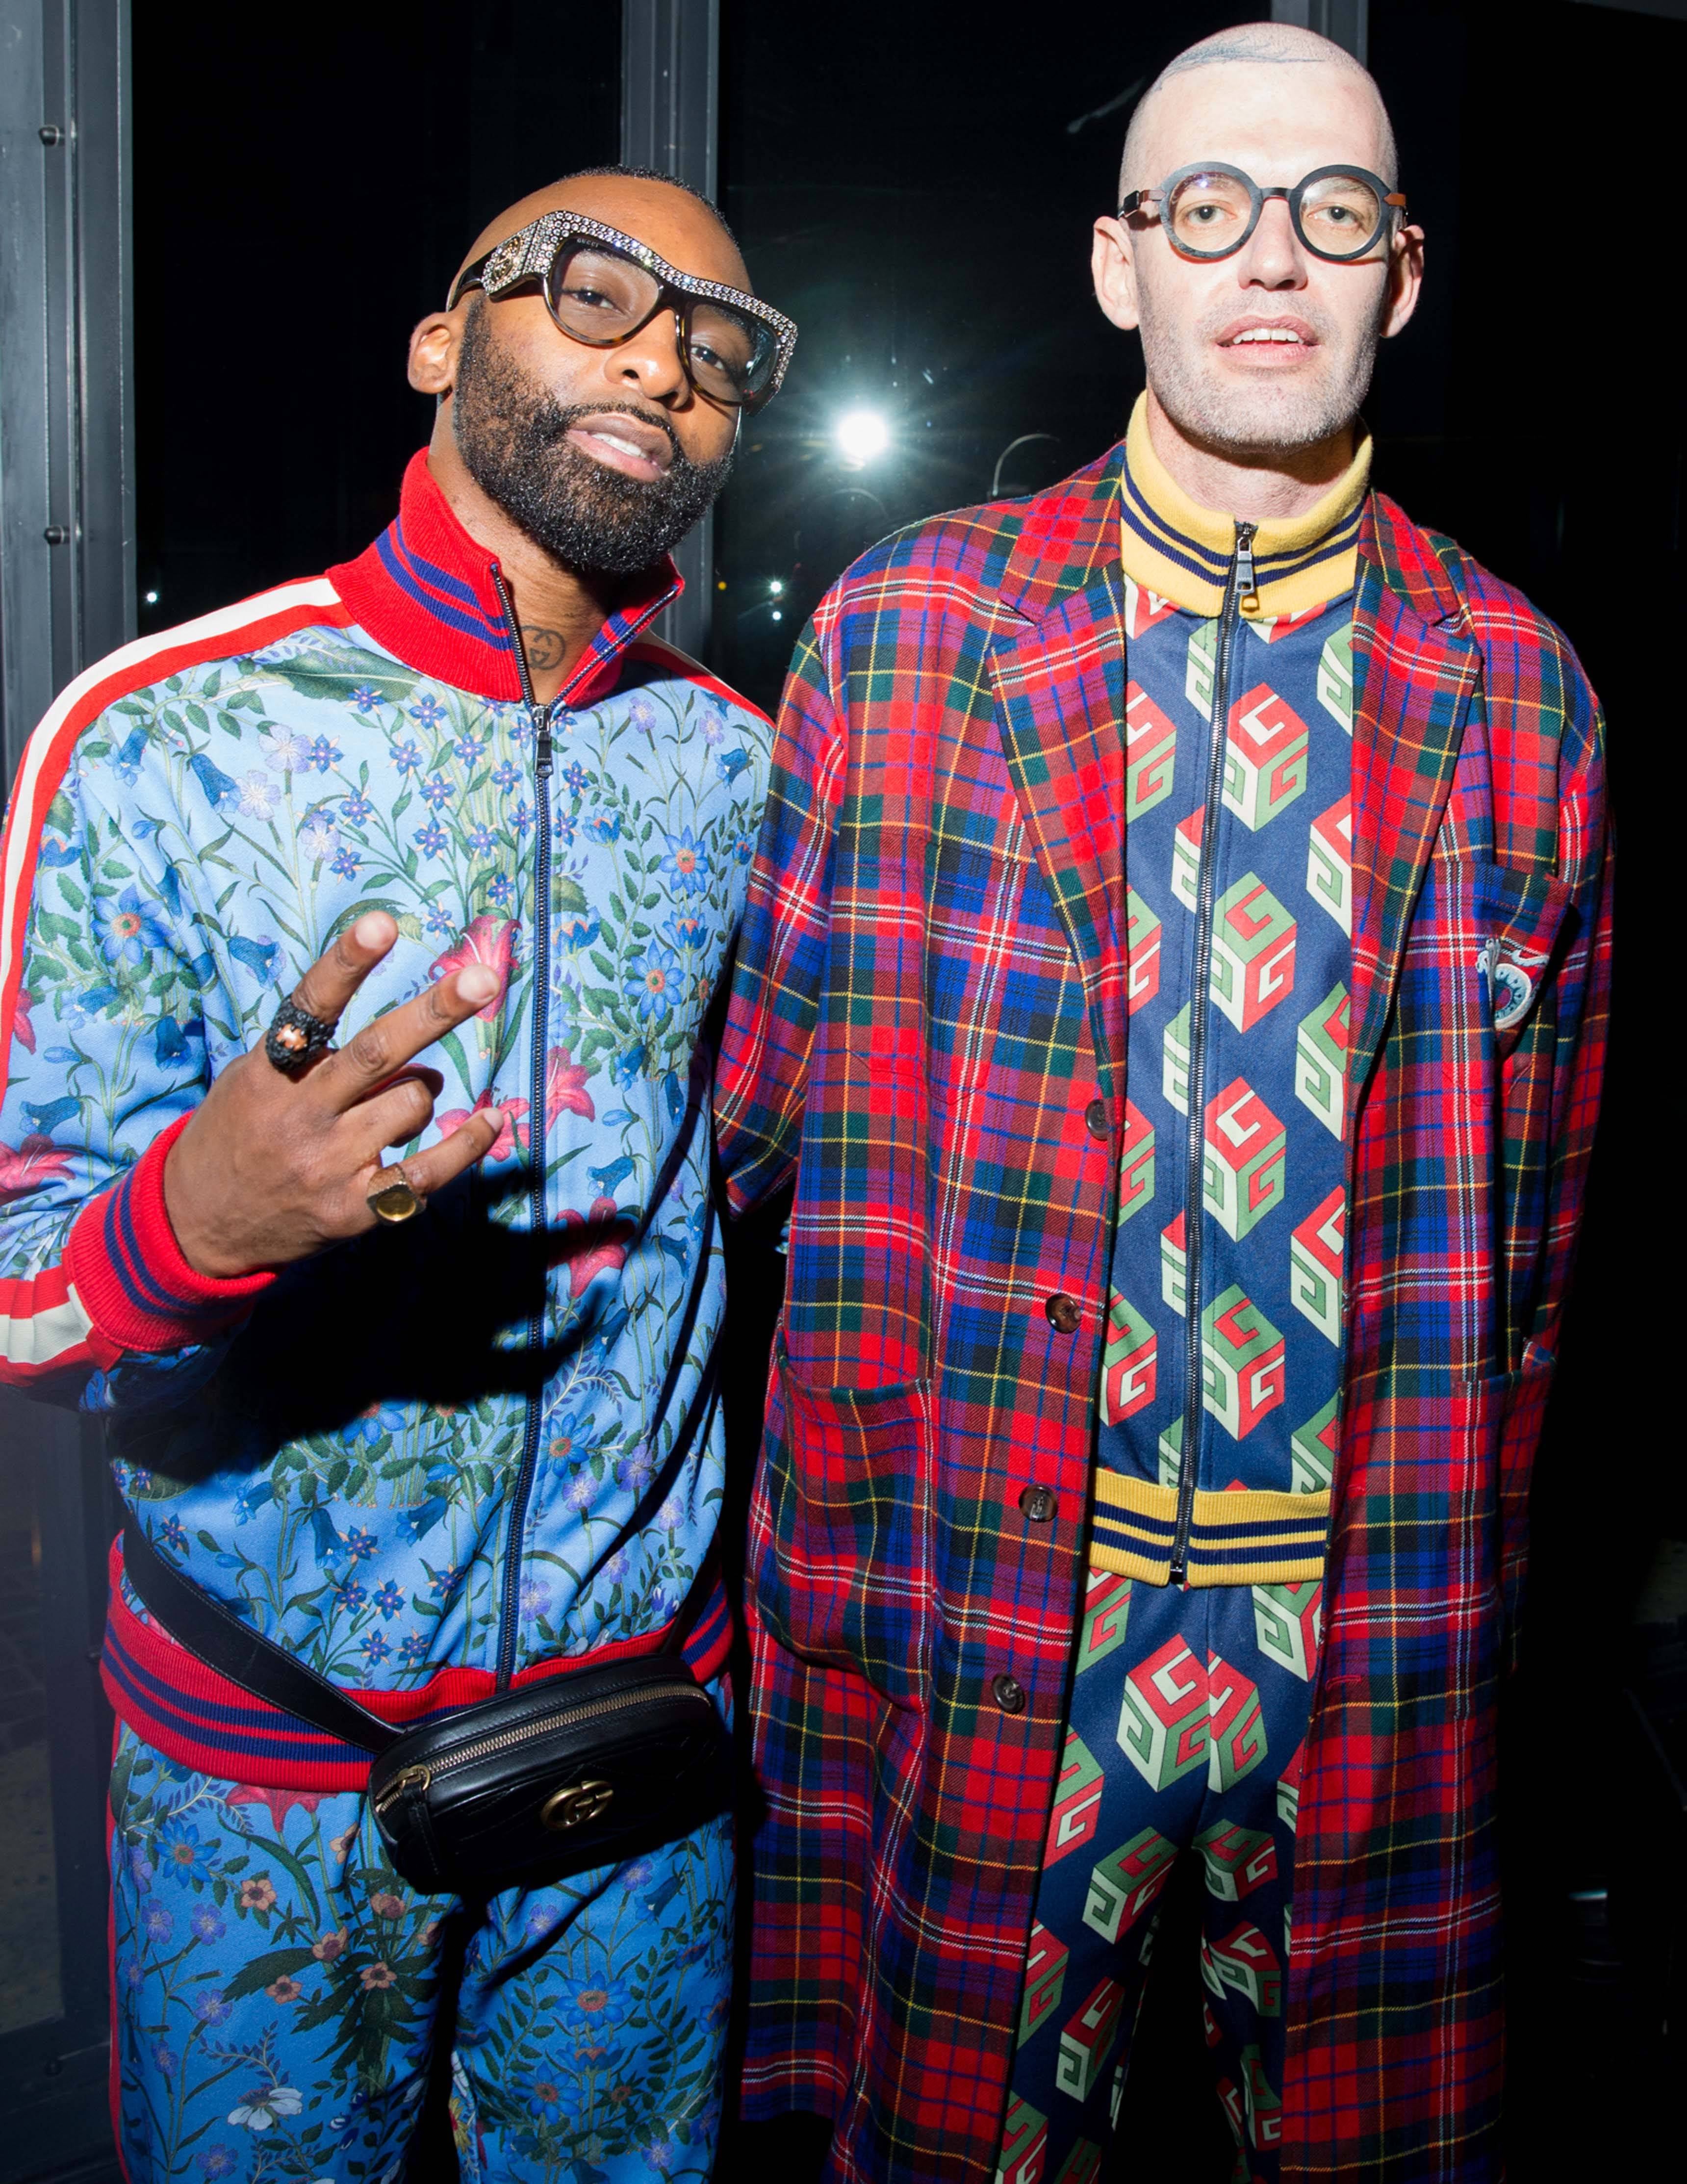 Riky Rick wore a Gucci Fall Winter 2017 azure macro new flora printed technical jersey zipped jacket and an azure macro new flora printed technical jersey jogging pants, a Pre Fall 2017 belt bag in black matelassé chevron leather with GG detail, and a Cruise 2017 leather sole moccasin in black leather with horsebit and Union Jack detail. Louw Kotzewore a Pre Fall 2017 royal bluette technical jersey zipped jacket with GG Wallpaper print and a royal bluette technical jersey jogging pants with GG Wallpaper print, a Pre Fall 2017 flare madras coat with embroidery detail, and Brixton mini GG wallpaper shoes.